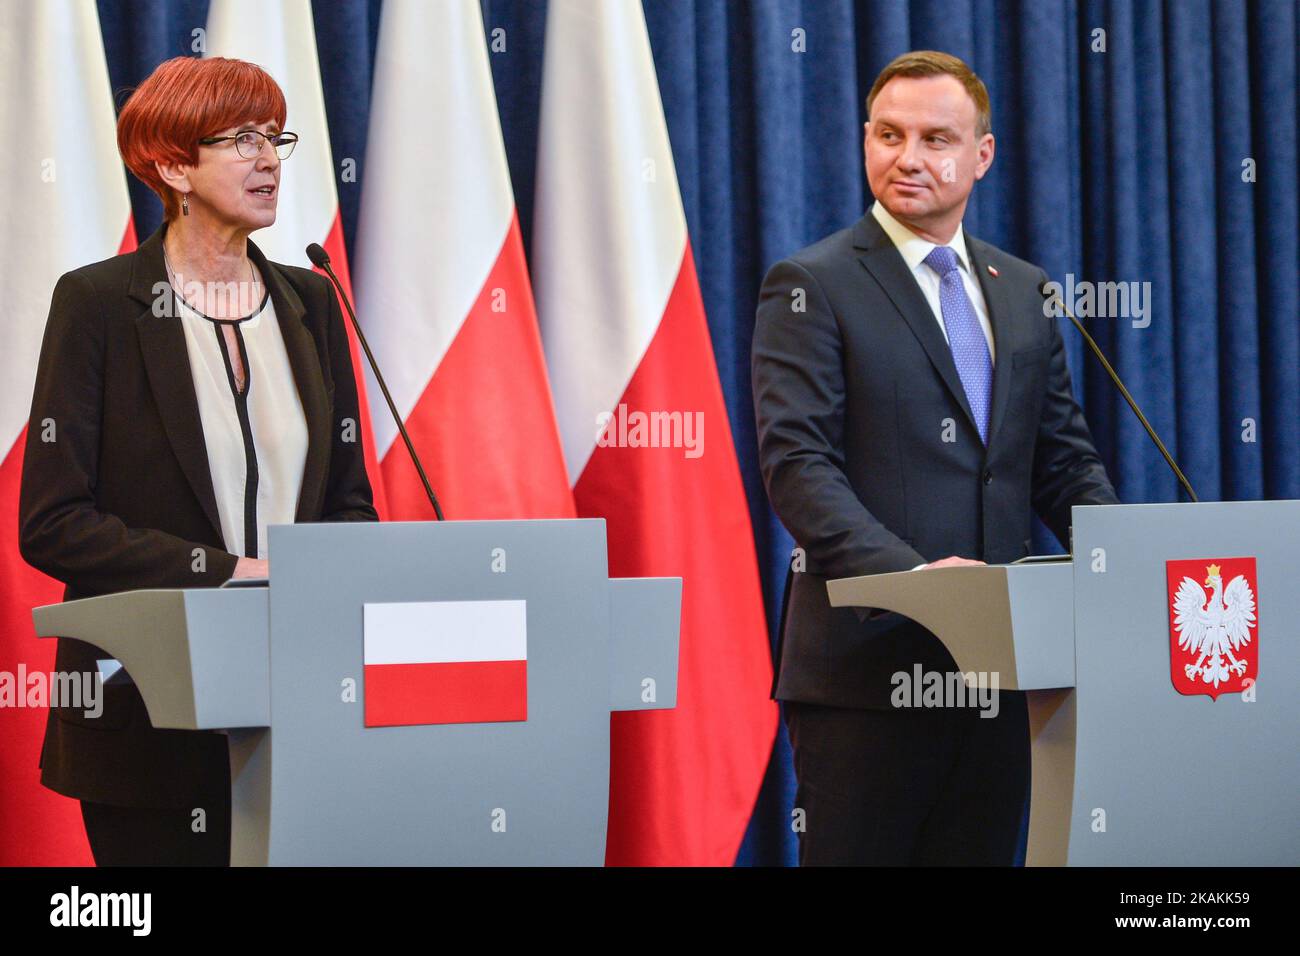 The President of Poland, Andrzej Duda and the Minister of Labour and Social Policy, Elzbieta Rafalska, arrive for the press conference making the first bilan of the Child Benefit Programme 'Family 500+' in the Presidential Palace in Warsaw. On Wednesday, 8 February 2017, in Warsaw, Poland. (Photo by Artur Widak/NurPhoto) *** Please Use Credit from Credit Field ***  Stock Photo